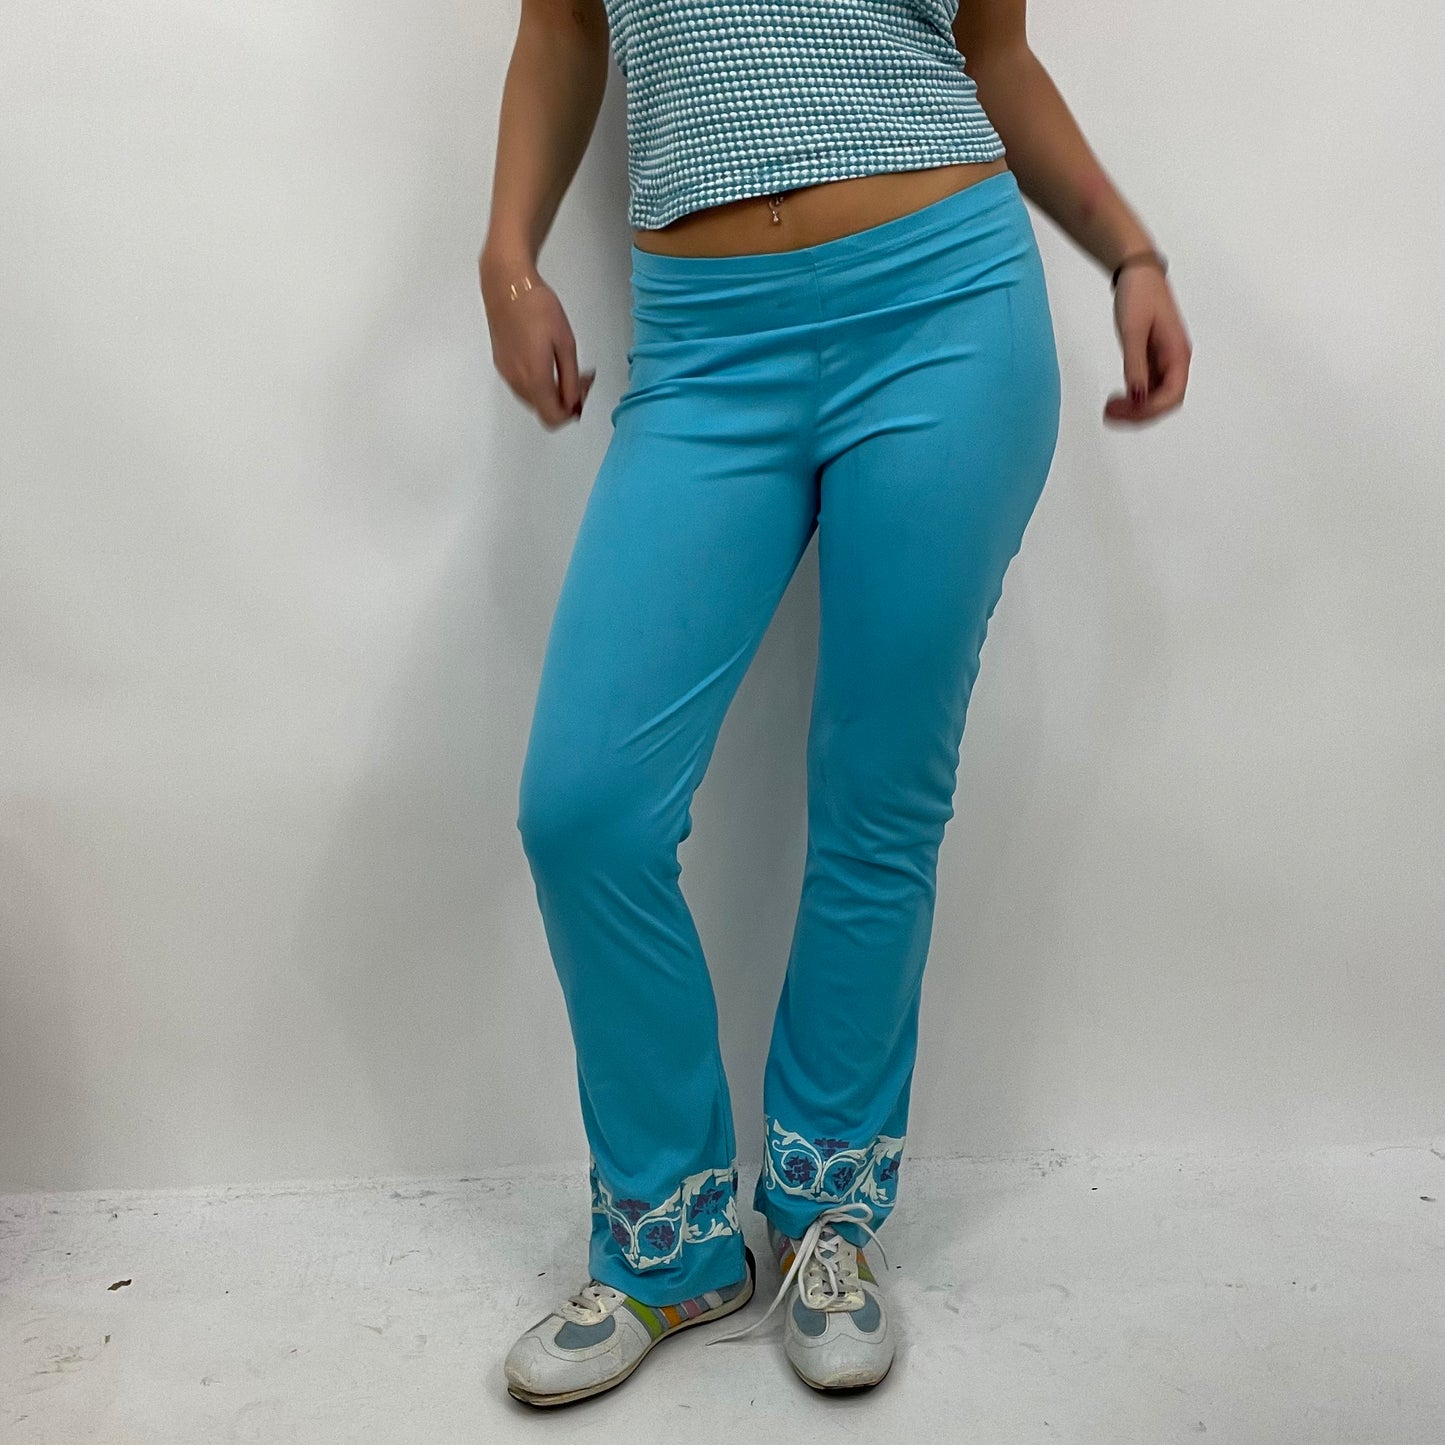 CHALET GIRL DROP | small blue patterned yoga pants